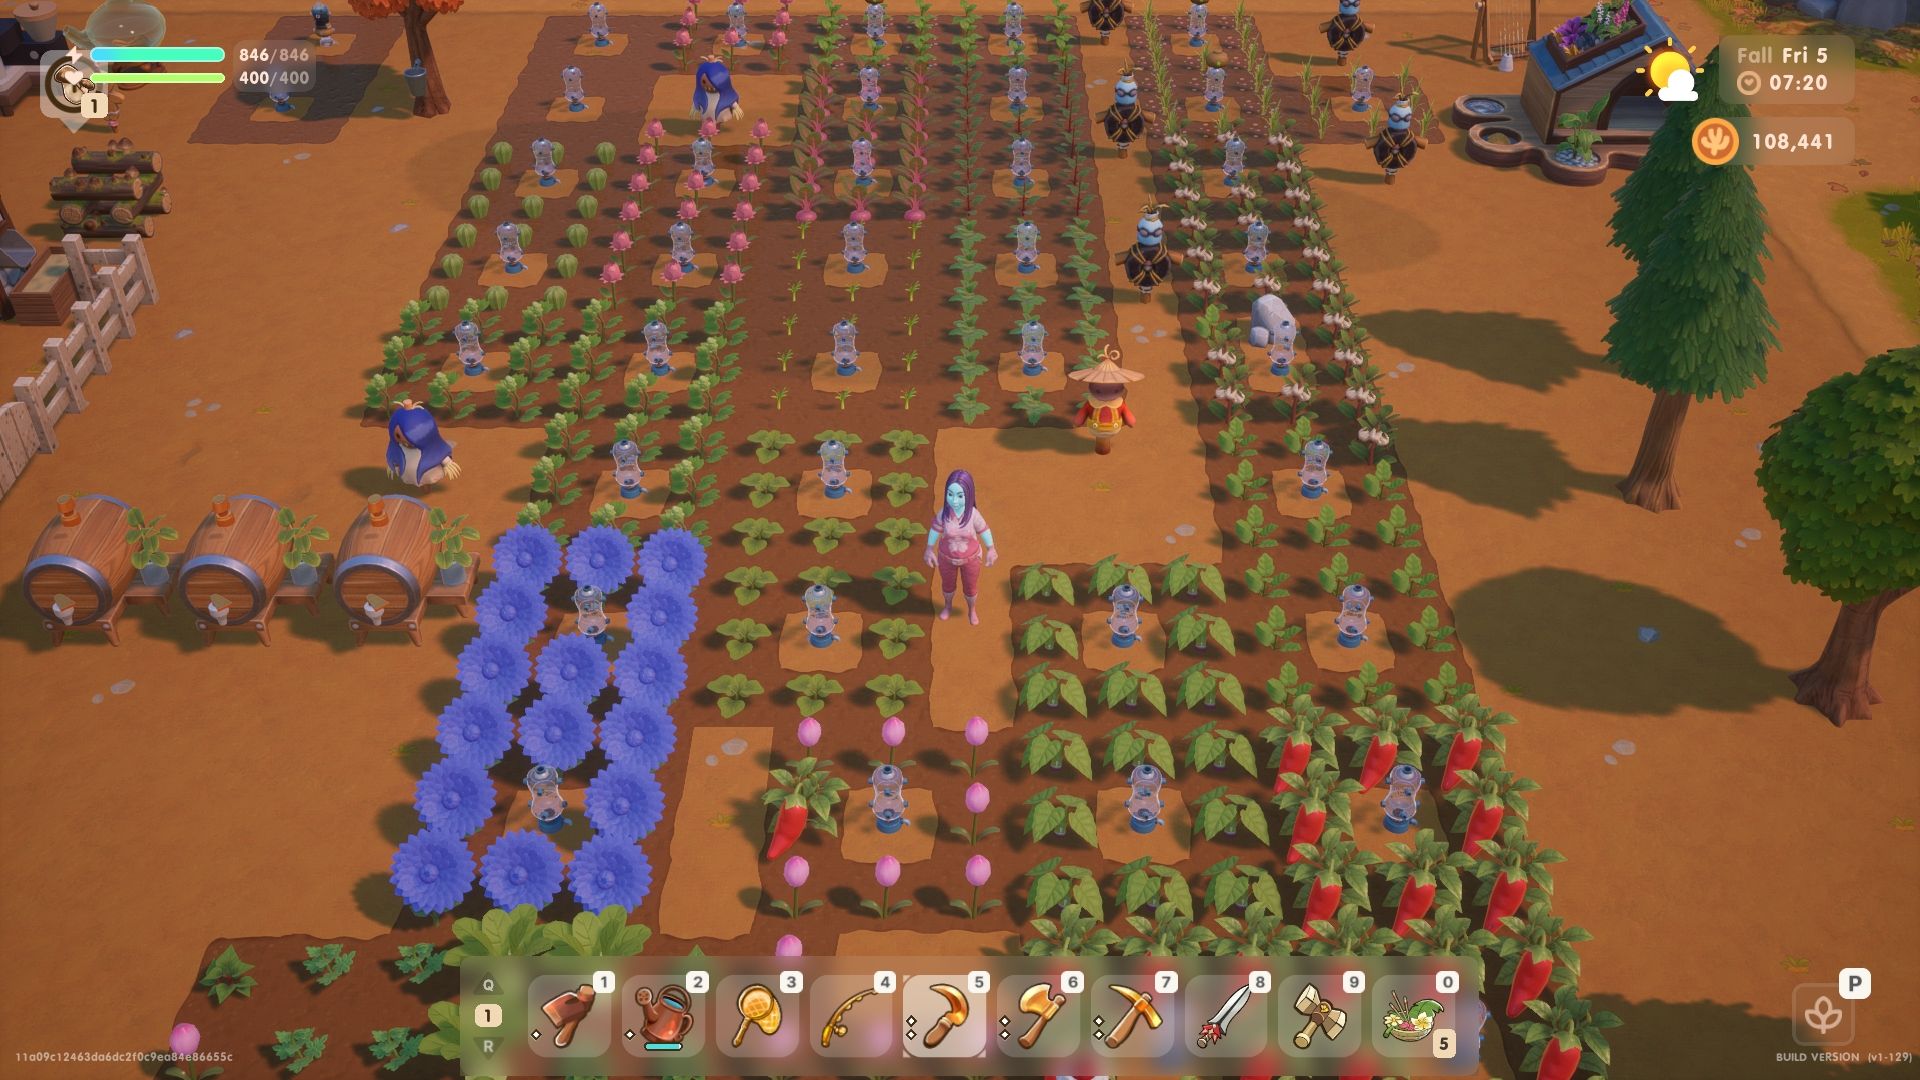 Coral Island avatar standing amidst crops growing on a farming plot. Hot peppers and some flowers are ready for harvesting in the foreground. 